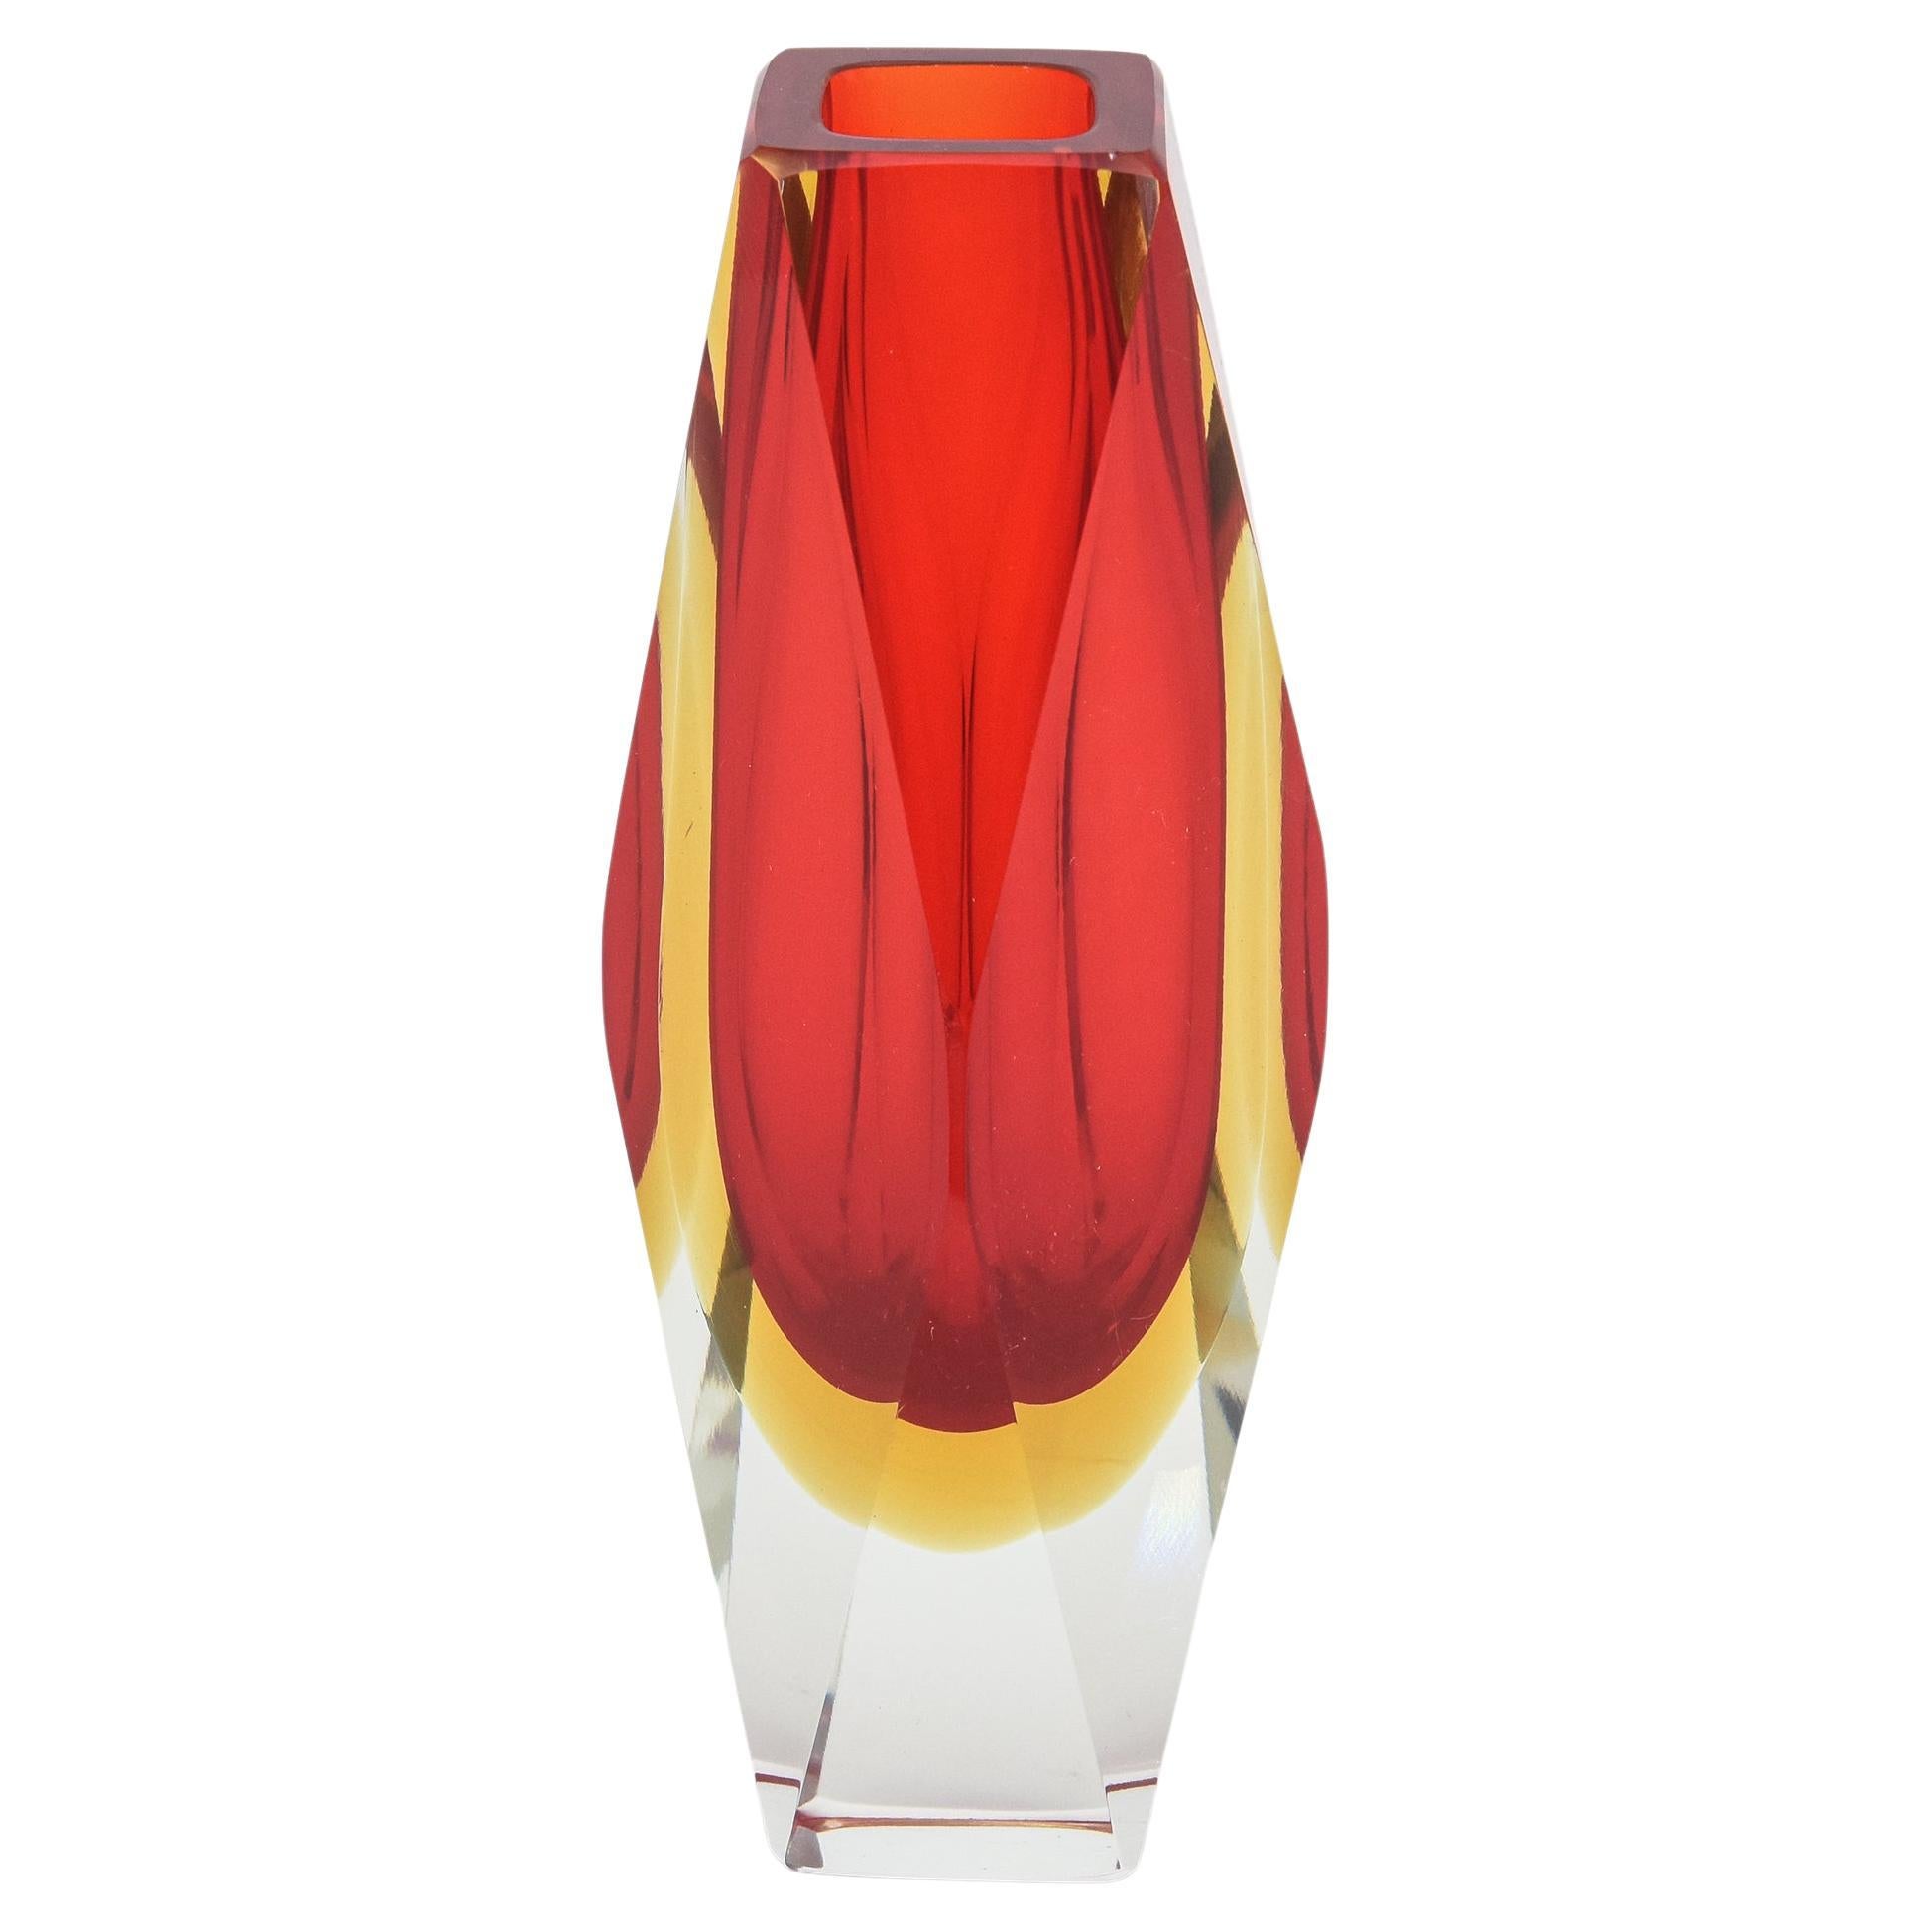 Mandruzzato Vintage Murano Red and Yellow Sommerso Faceted Glass Vase Italian For Sale